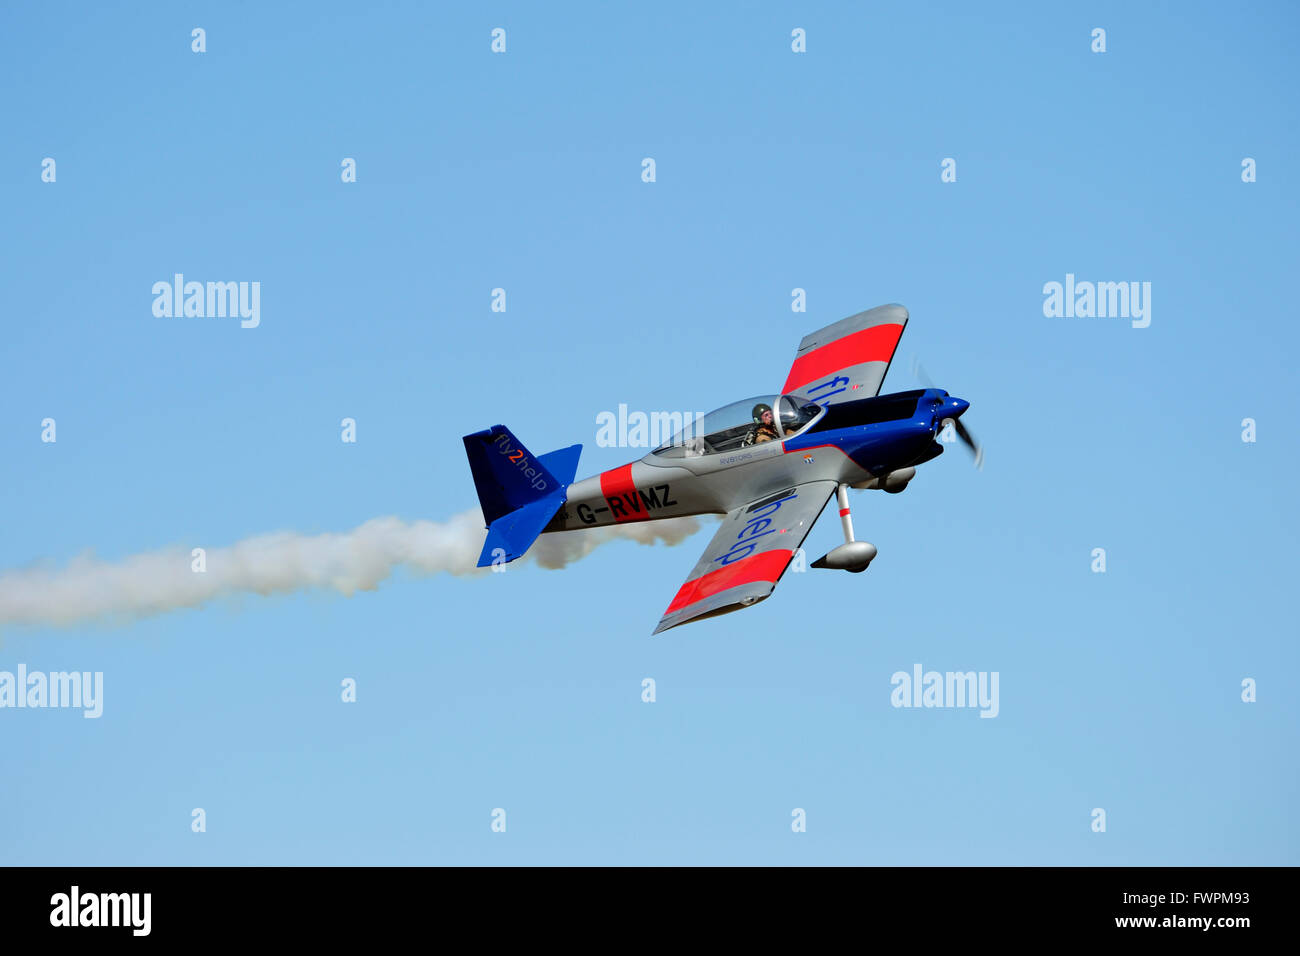 Rv 8 High Resolution Stock Photography and Images - Alamy